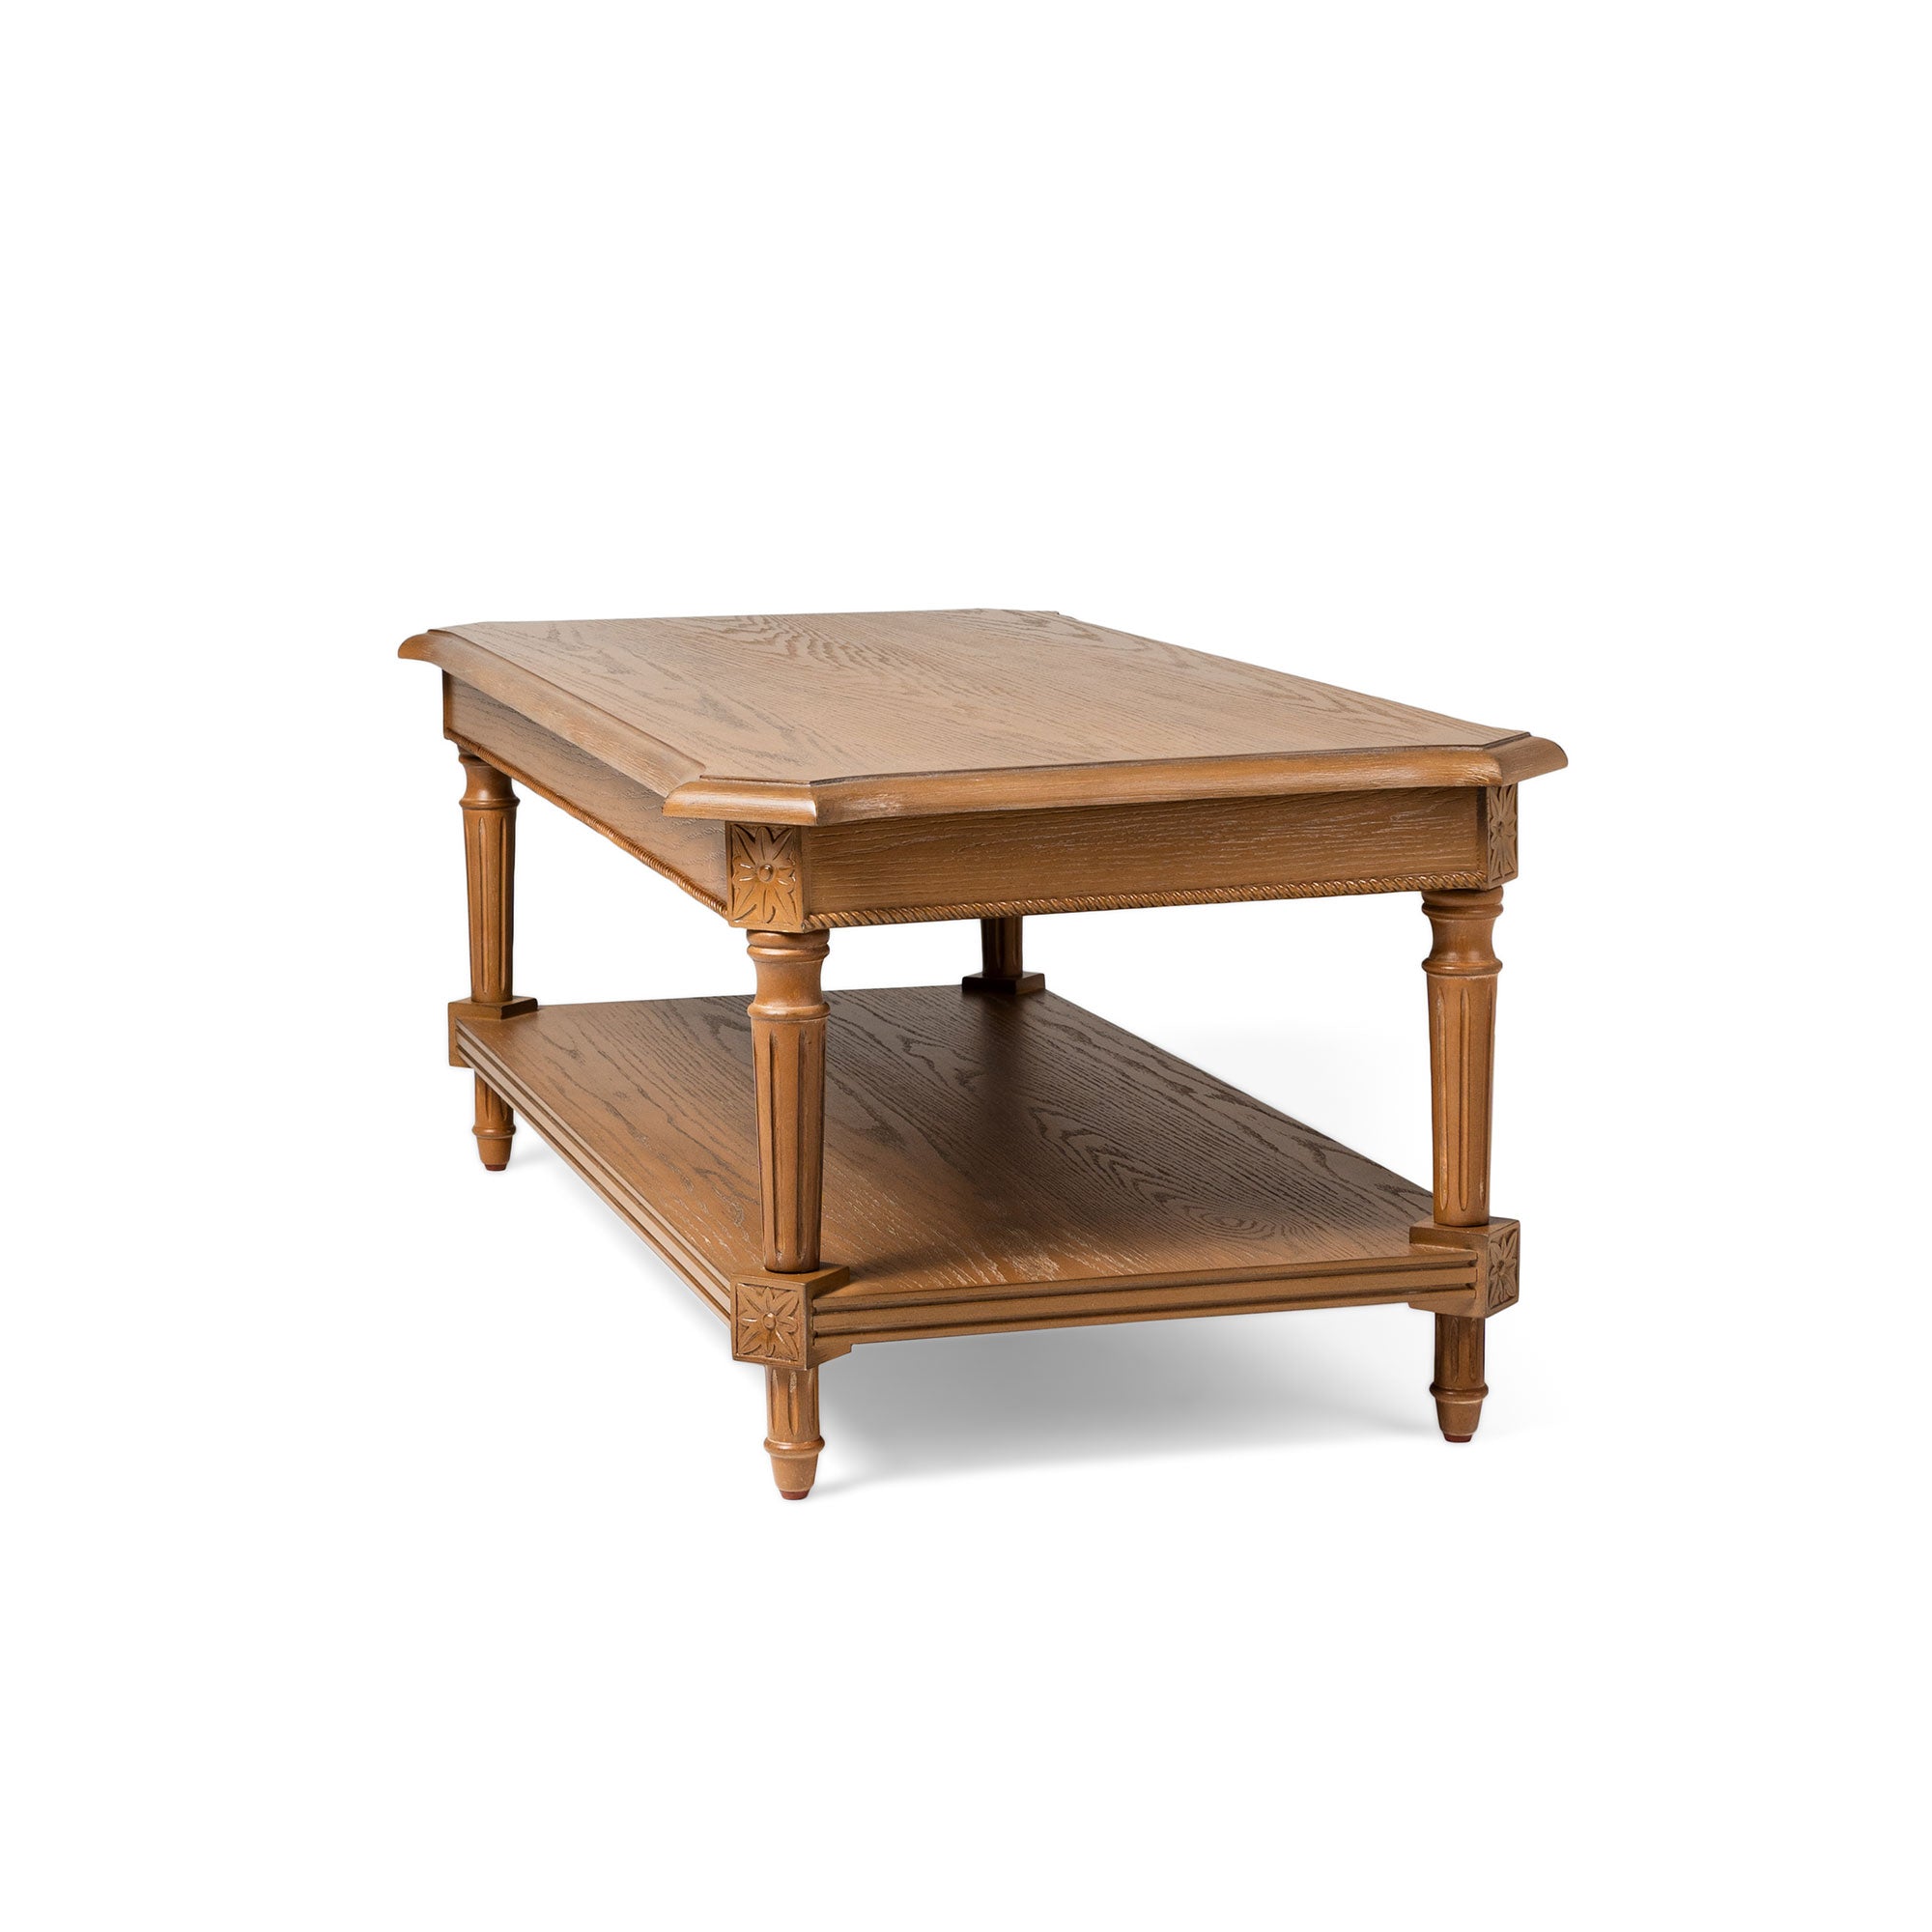 Pullman Traditional Rectangular Wooden Coffee Table in Antiqued Natural Finish in Accent Tables by Maven Lane